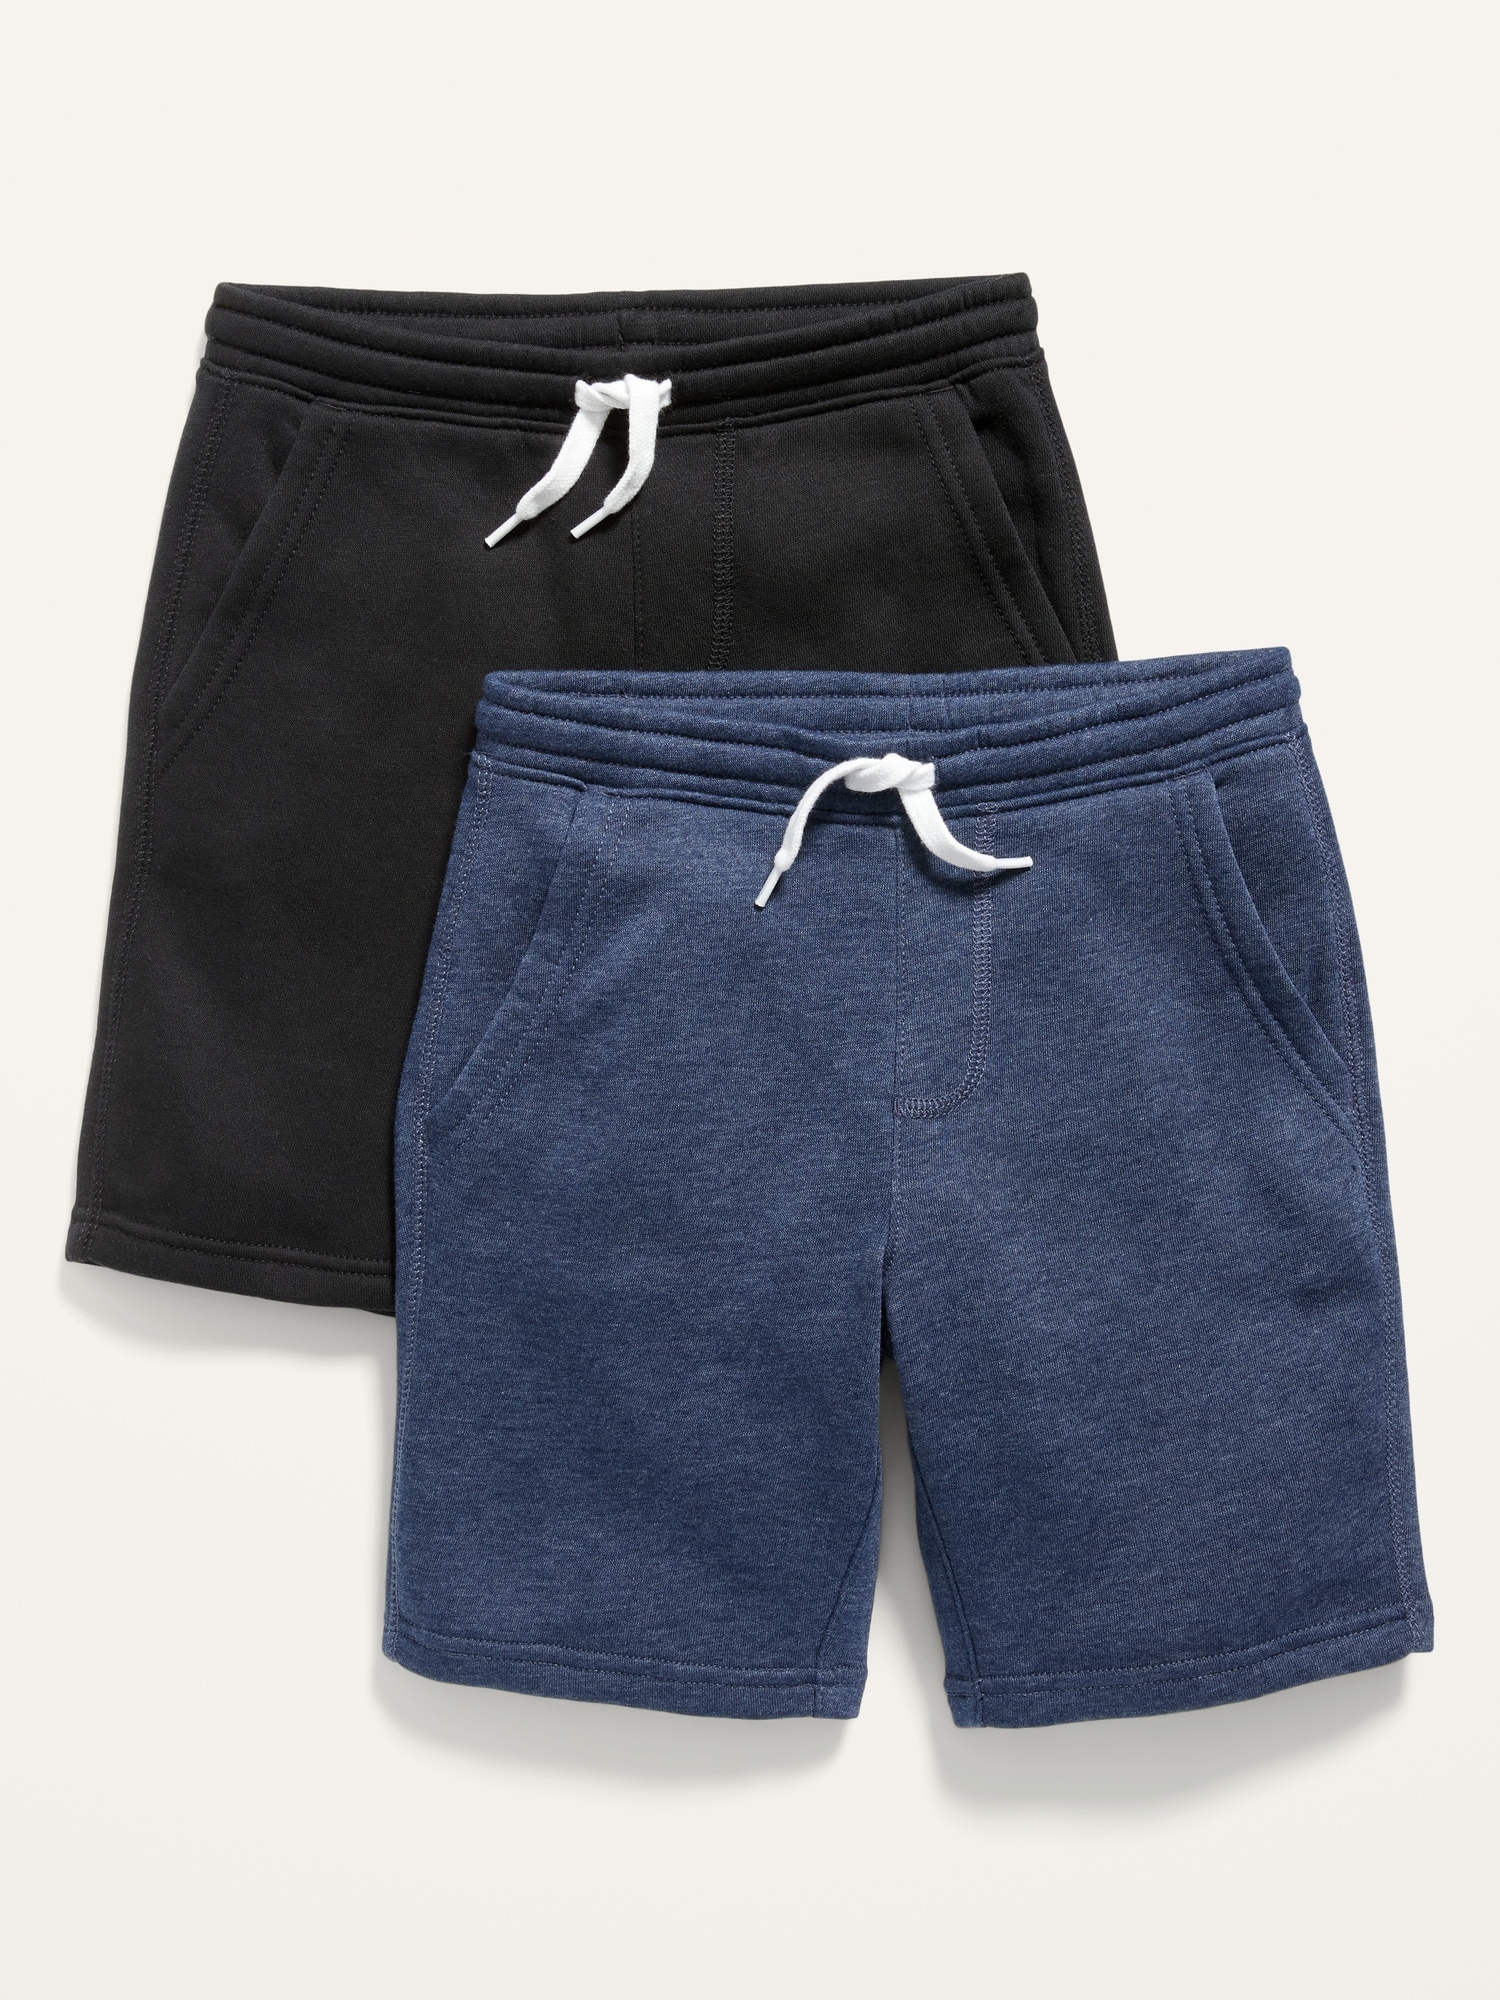 2-Pack Fleece Jogger Shorts for Boys (At Knee) Hot Deal